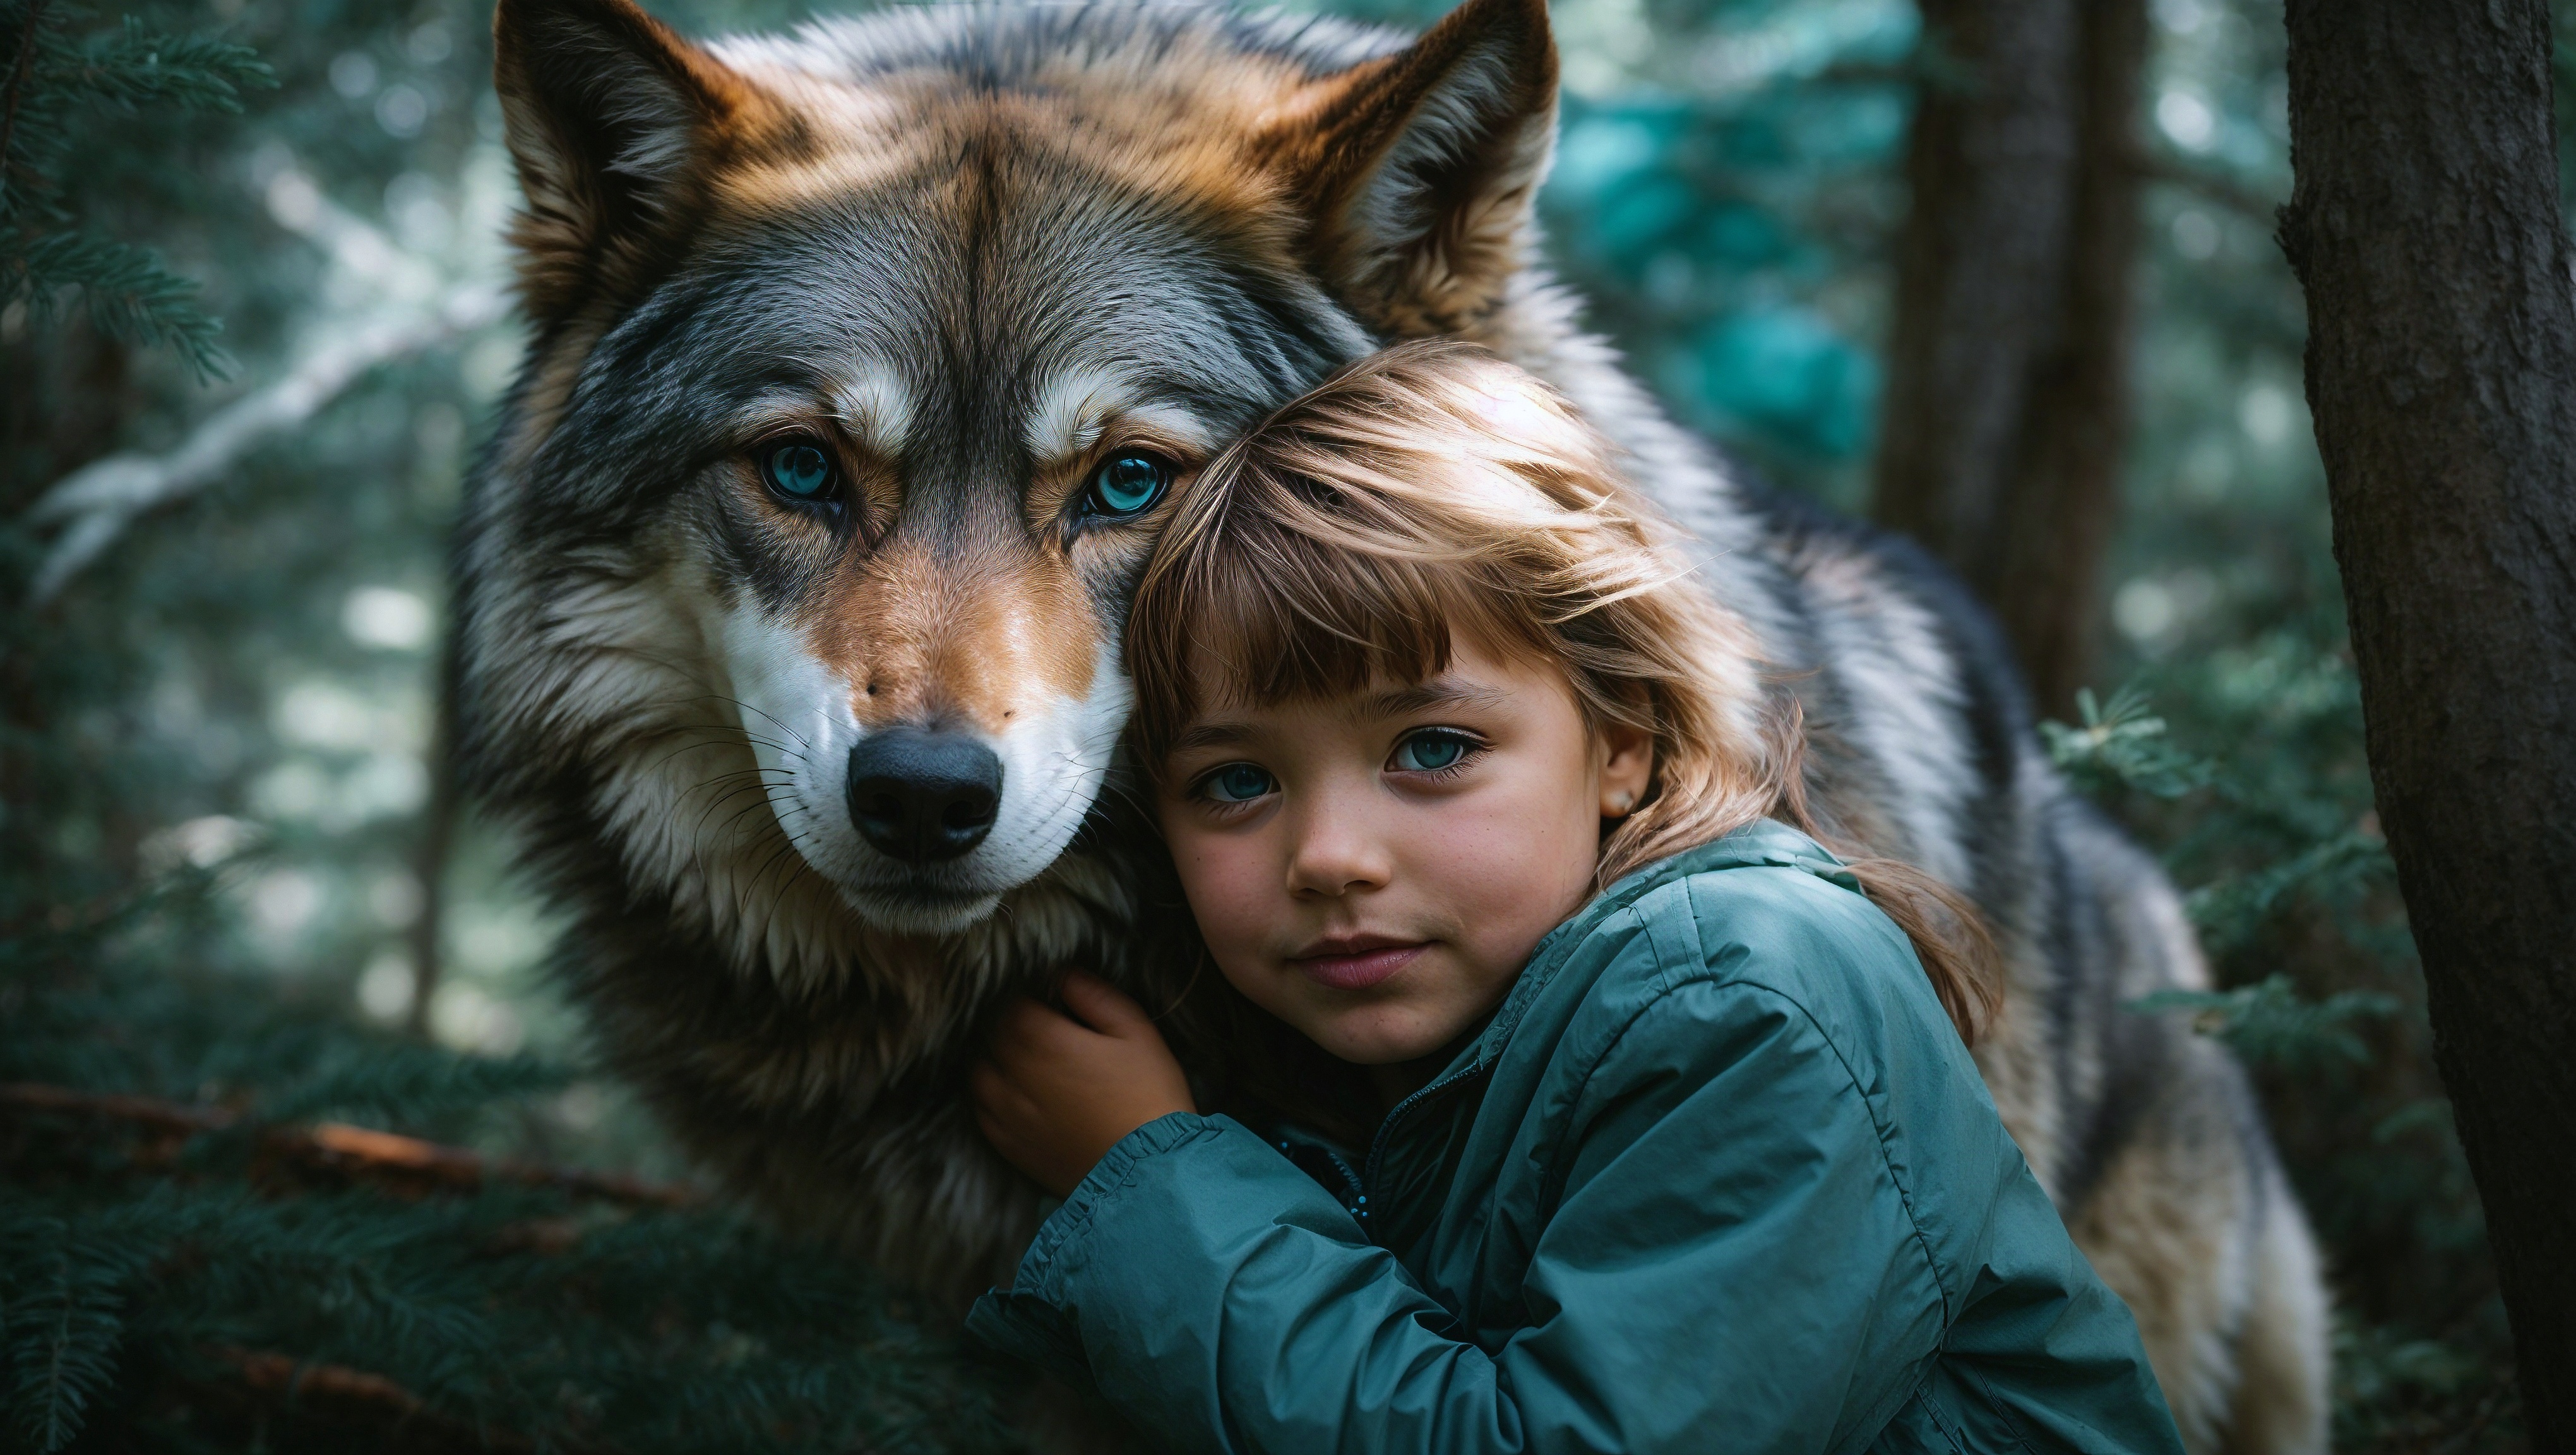 The girl poses next to the wolf outside